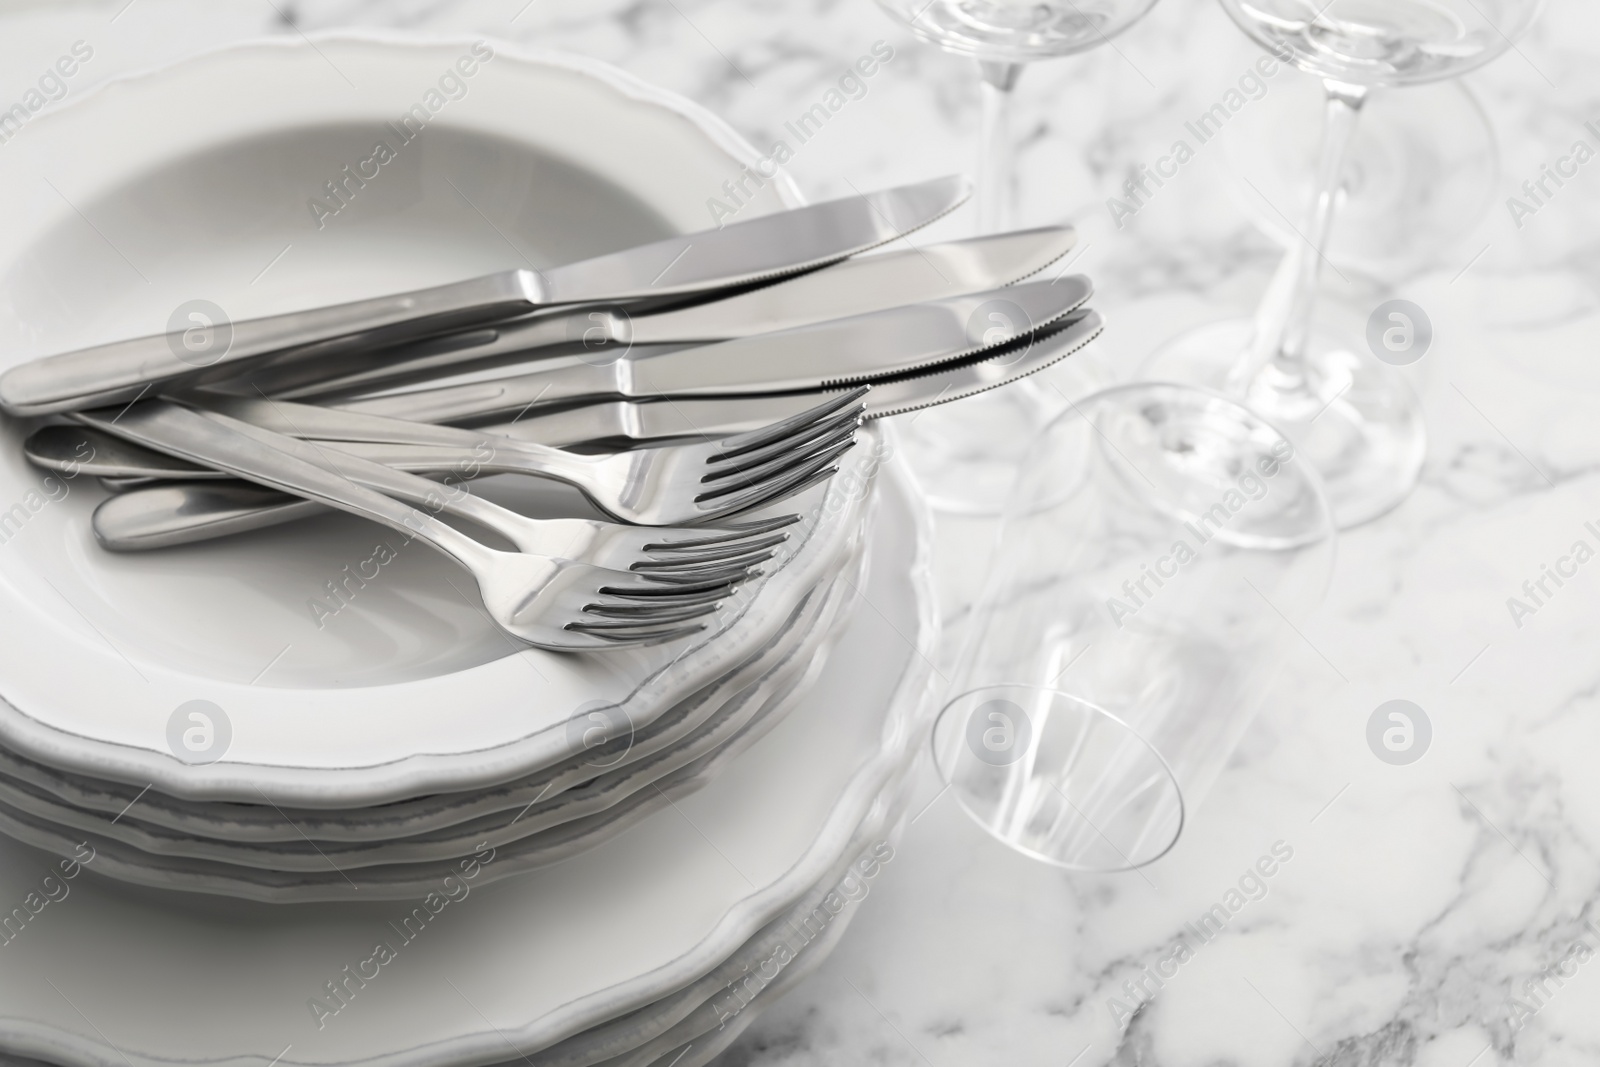 Photo of Plates, cutlery and glasses on white marble table, closeup